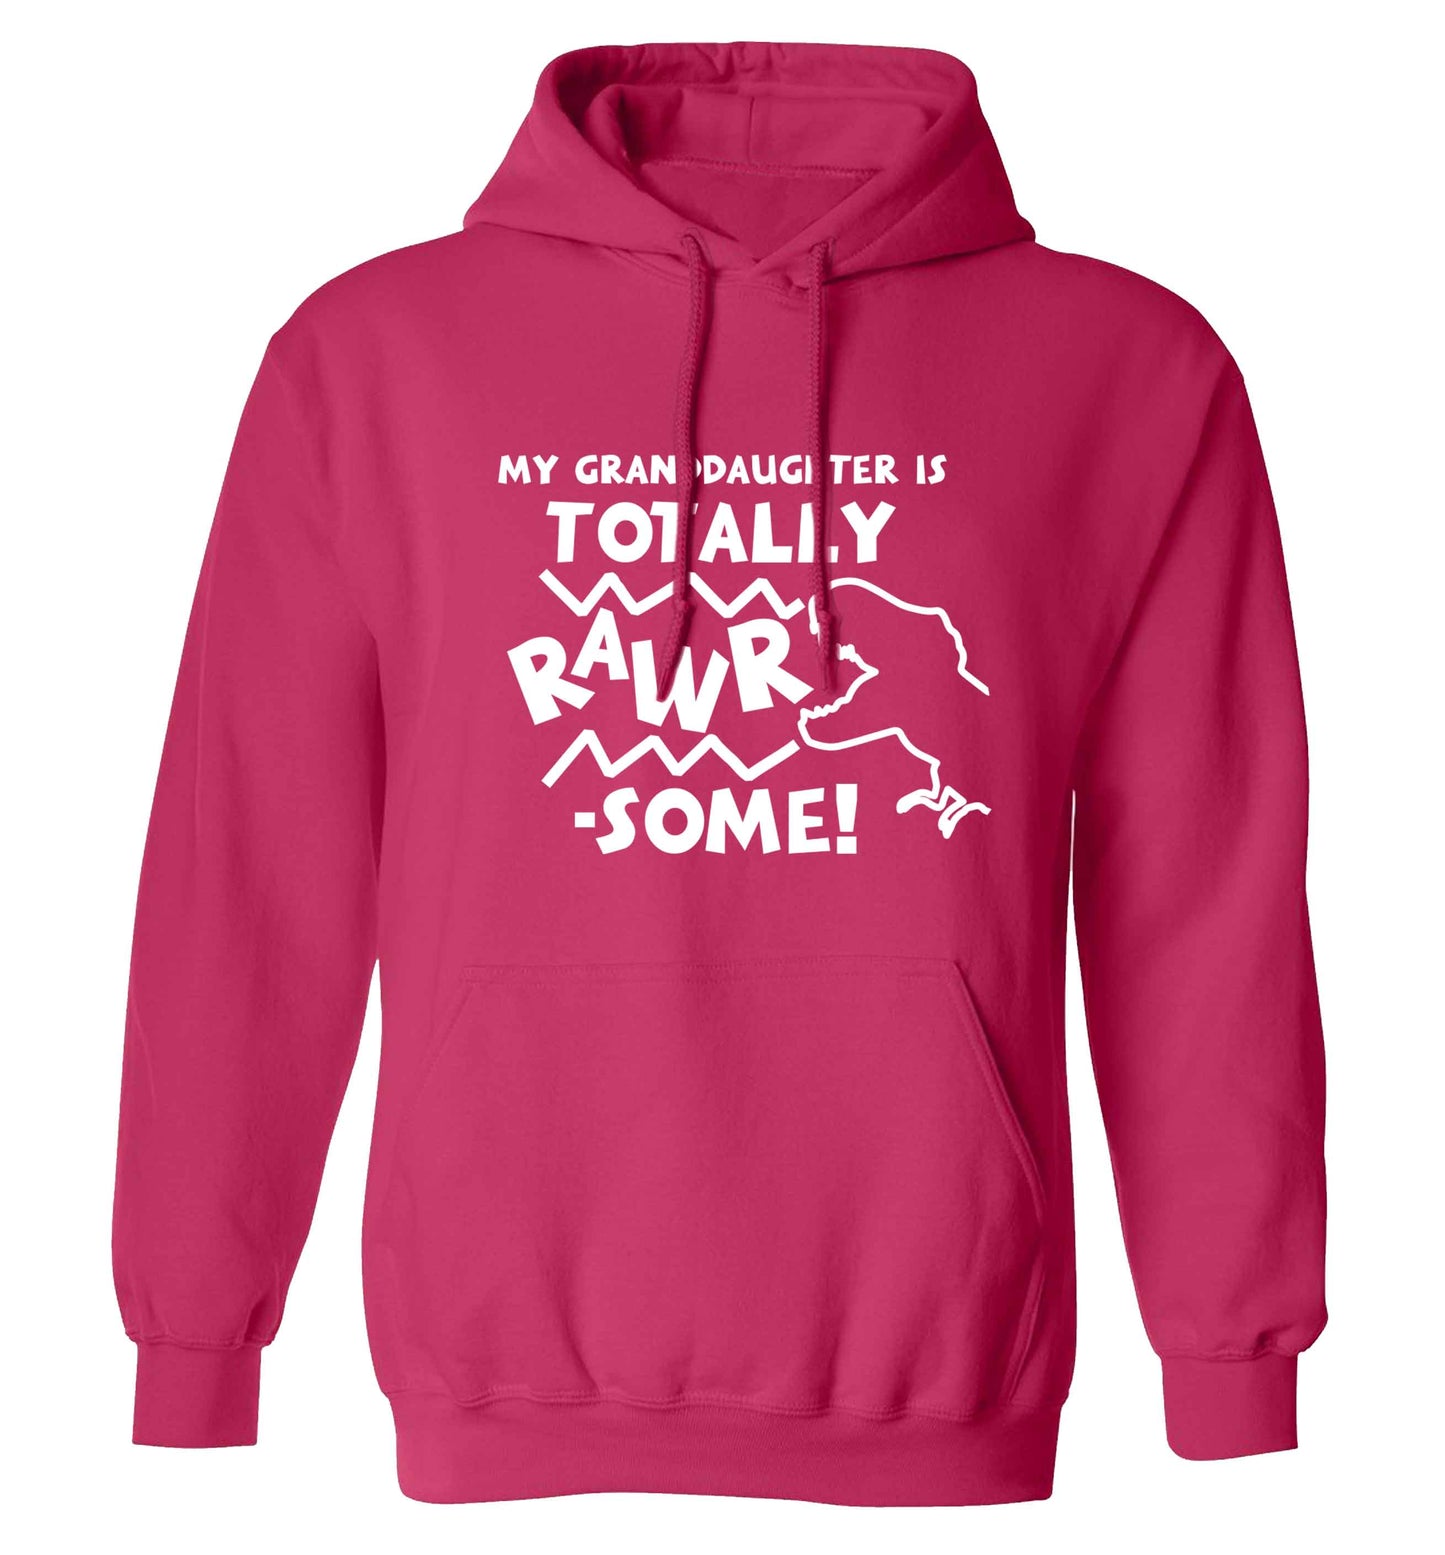 My granddaughter is totally rawrsome adults unisex pink hoodie 2XL